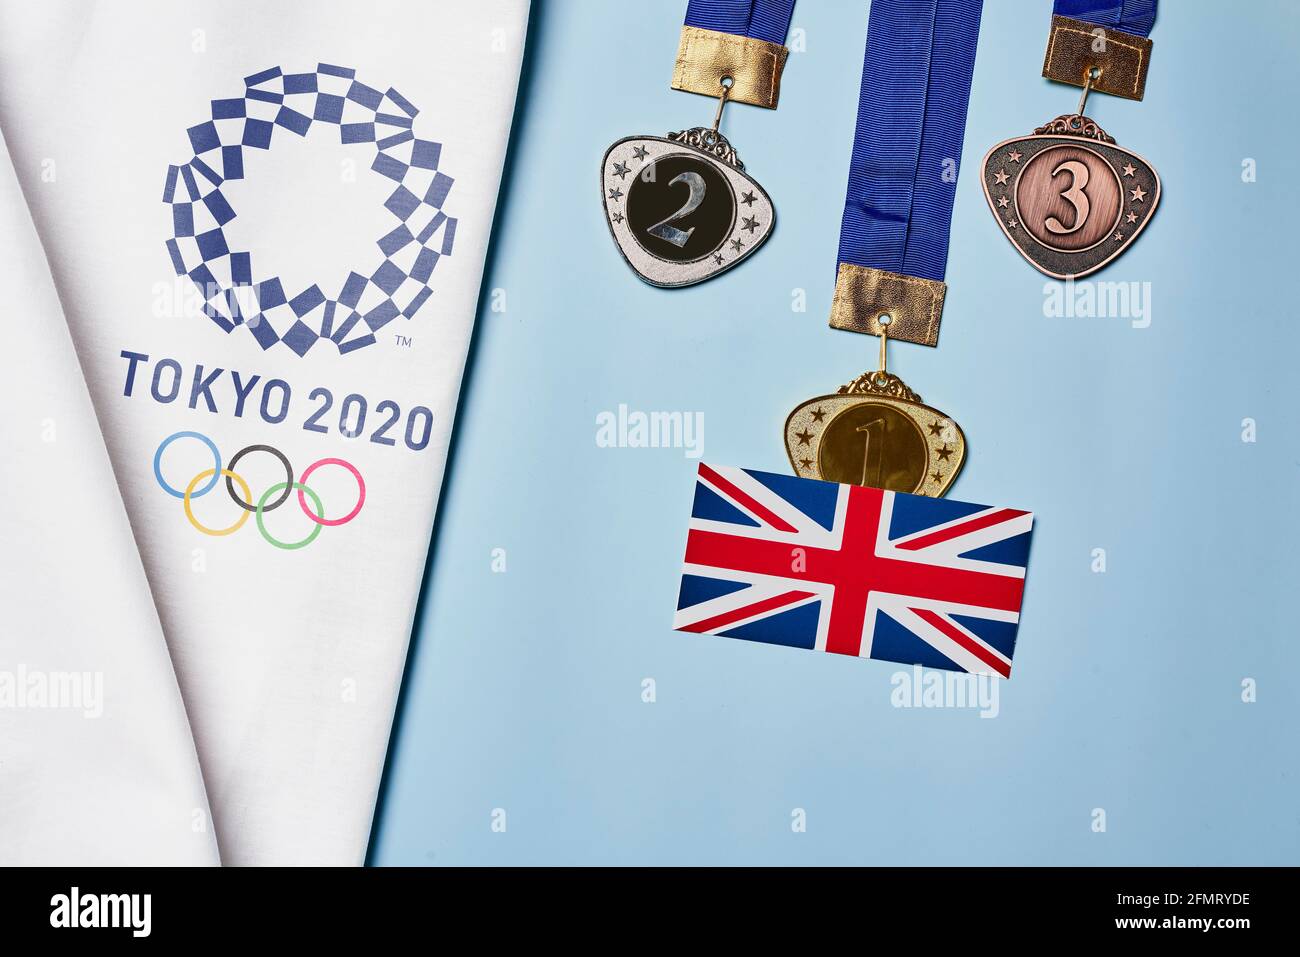 Tashkent, Uzbekistan - March 4, 2021: 2020 Summer Olympic Games logo on white towel and Golden, Silver and Bronze olympic medals Stock Photo